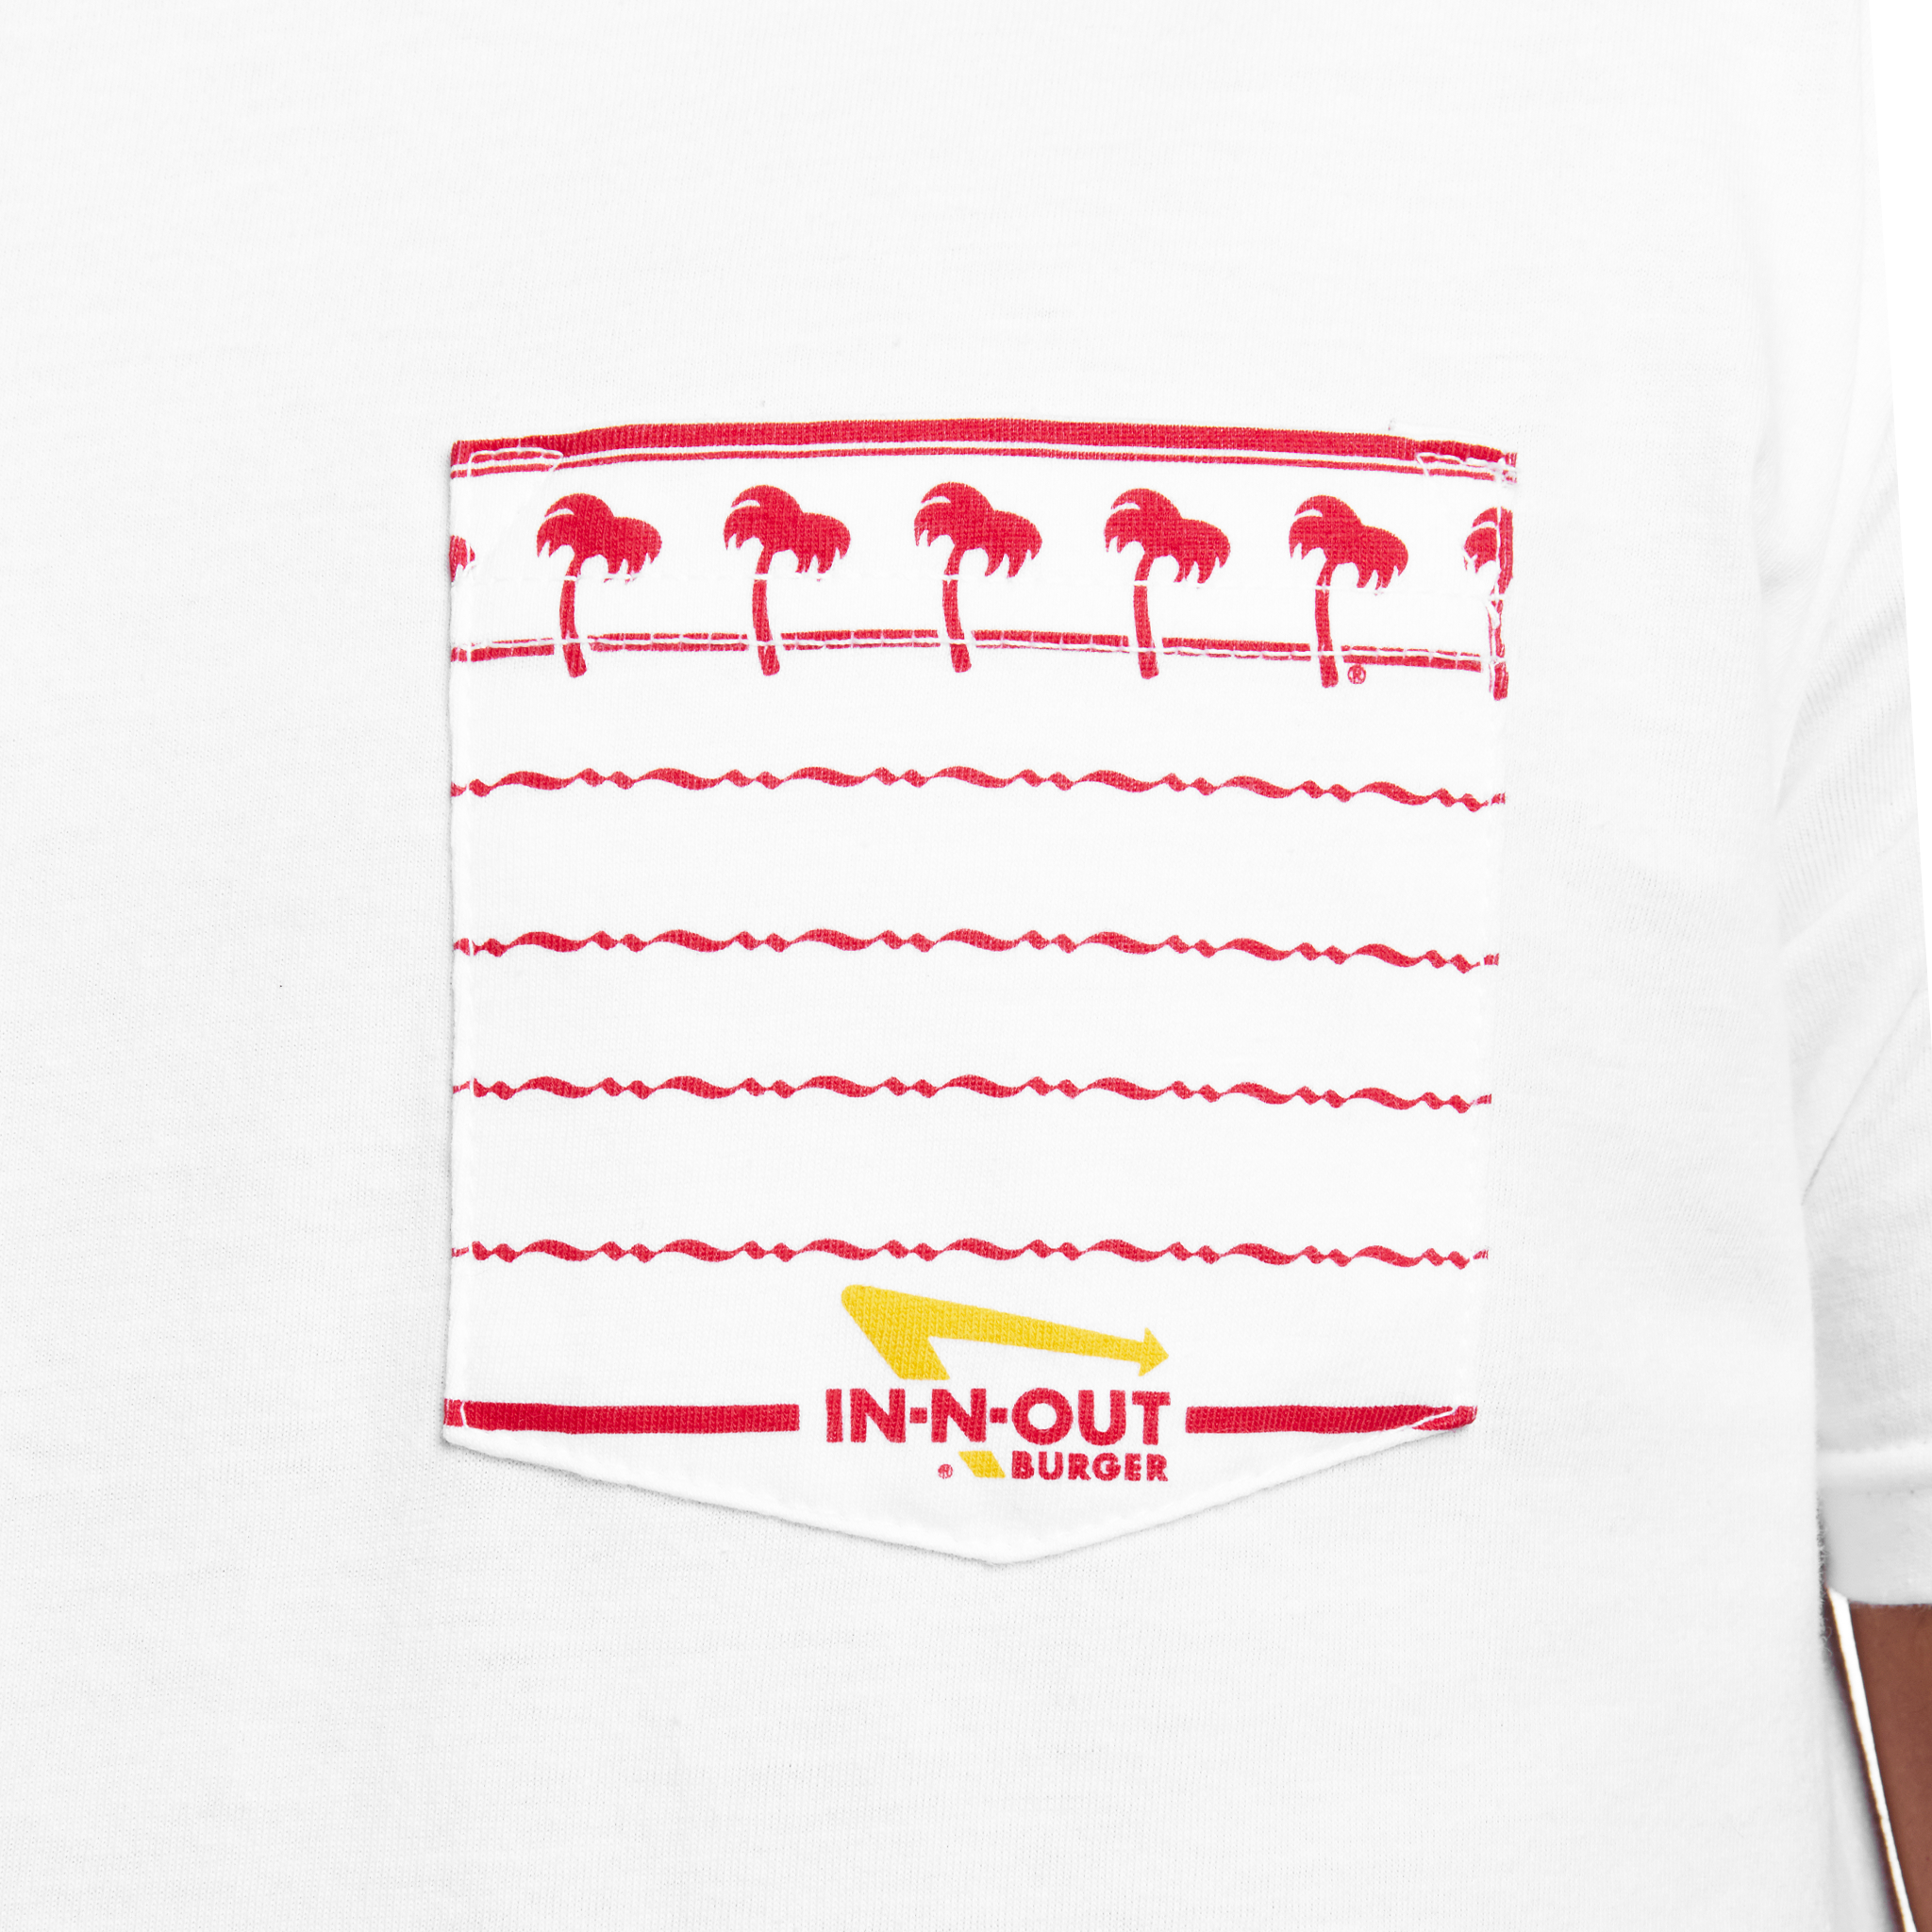 Quality You Can Taste Pocket Tee – In-N-Out Burger Company Store